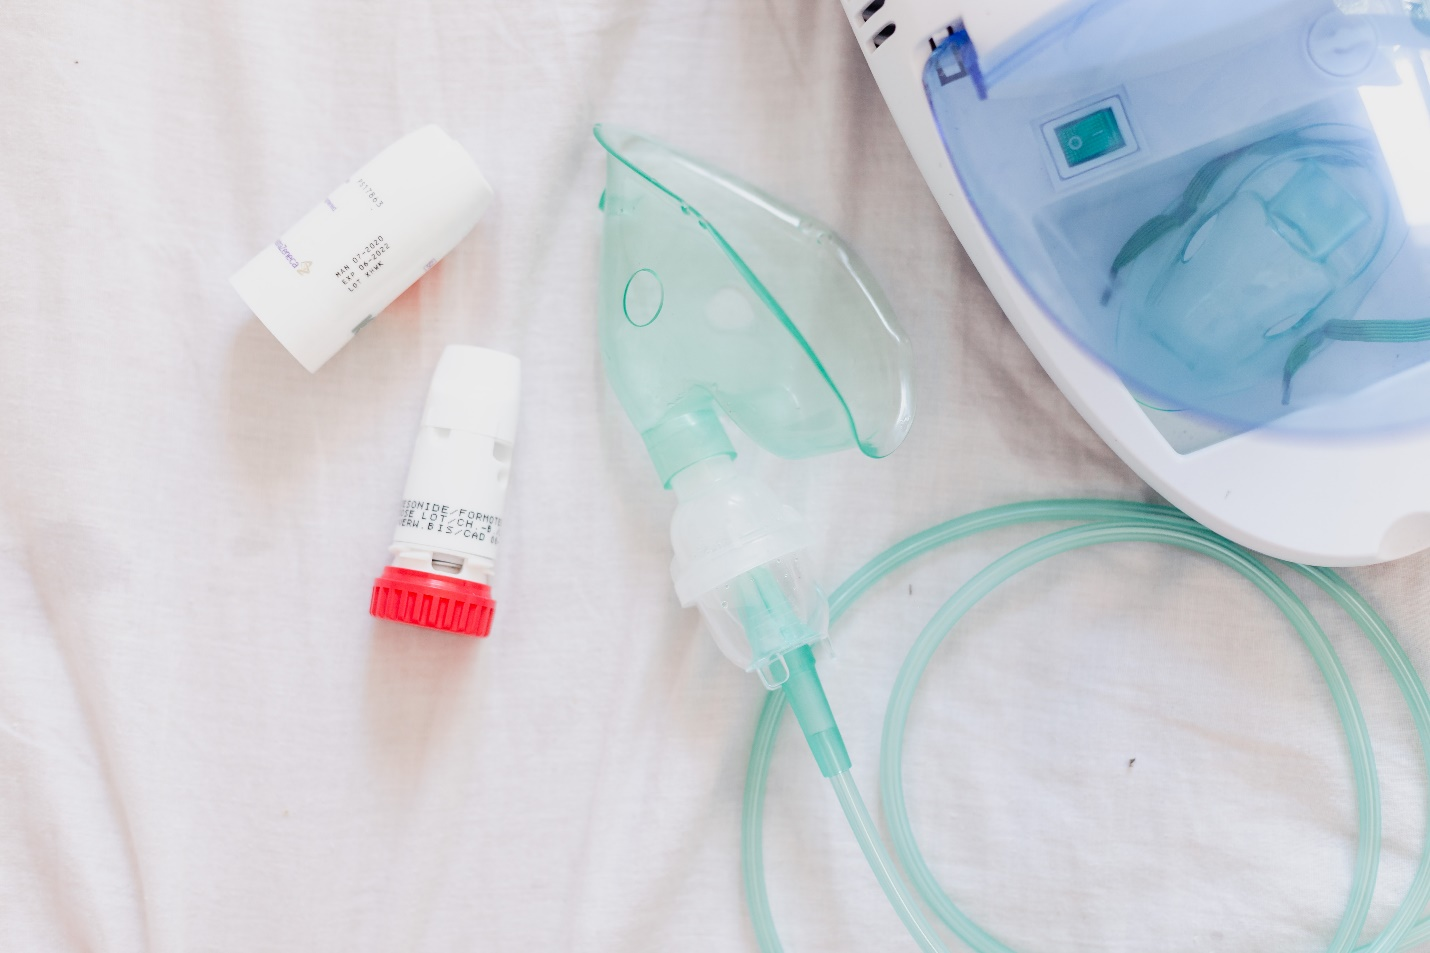 Nebulizer and medicine to aid breathing